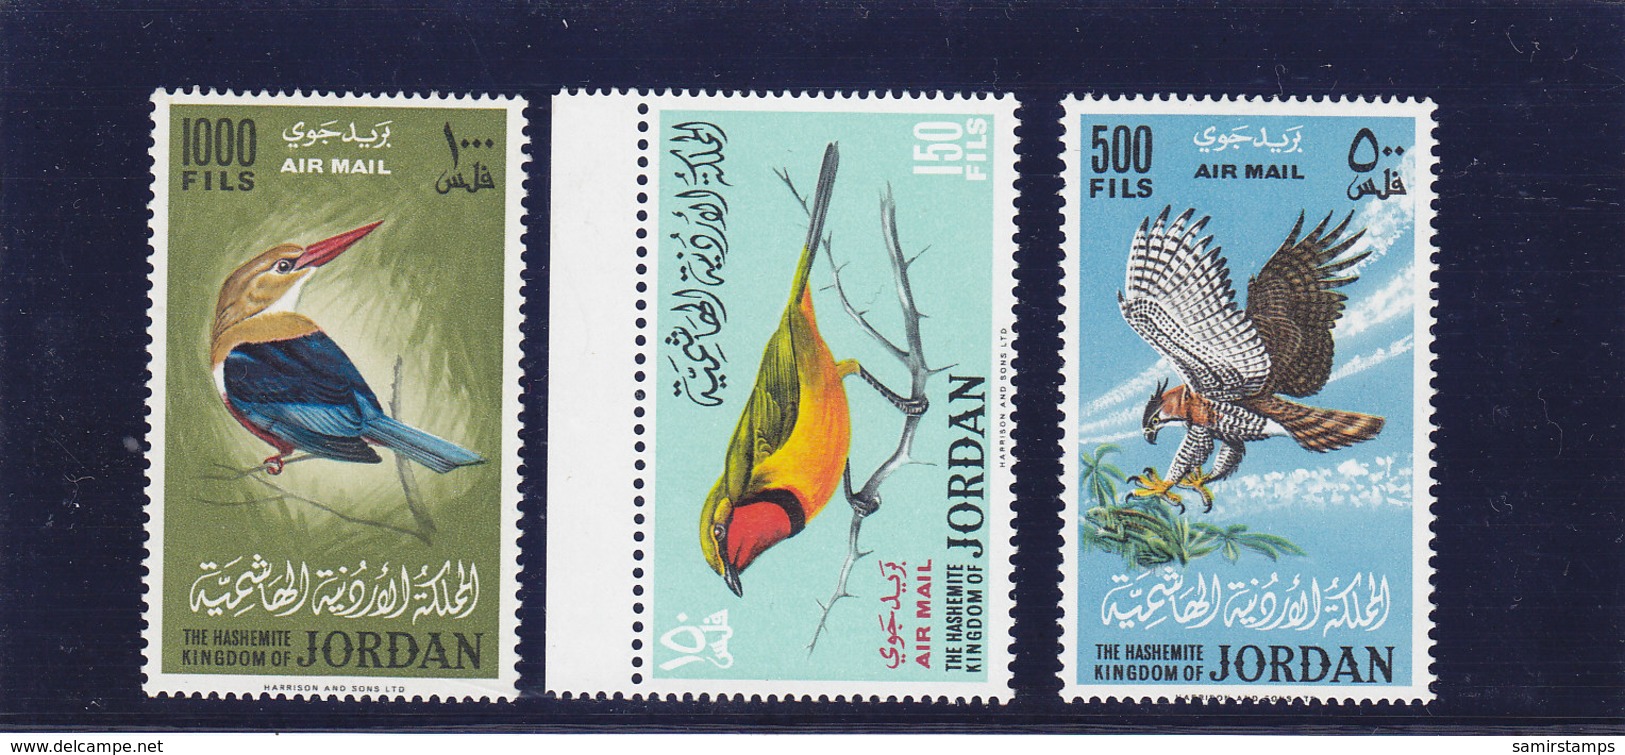 Jordan Auir Mail Brids 1964 3 Stamps Complete Set MNH Superb, Exctr.rare Topical Set- Red. Price- SKRILL PAYMENT ONLY - Giordania